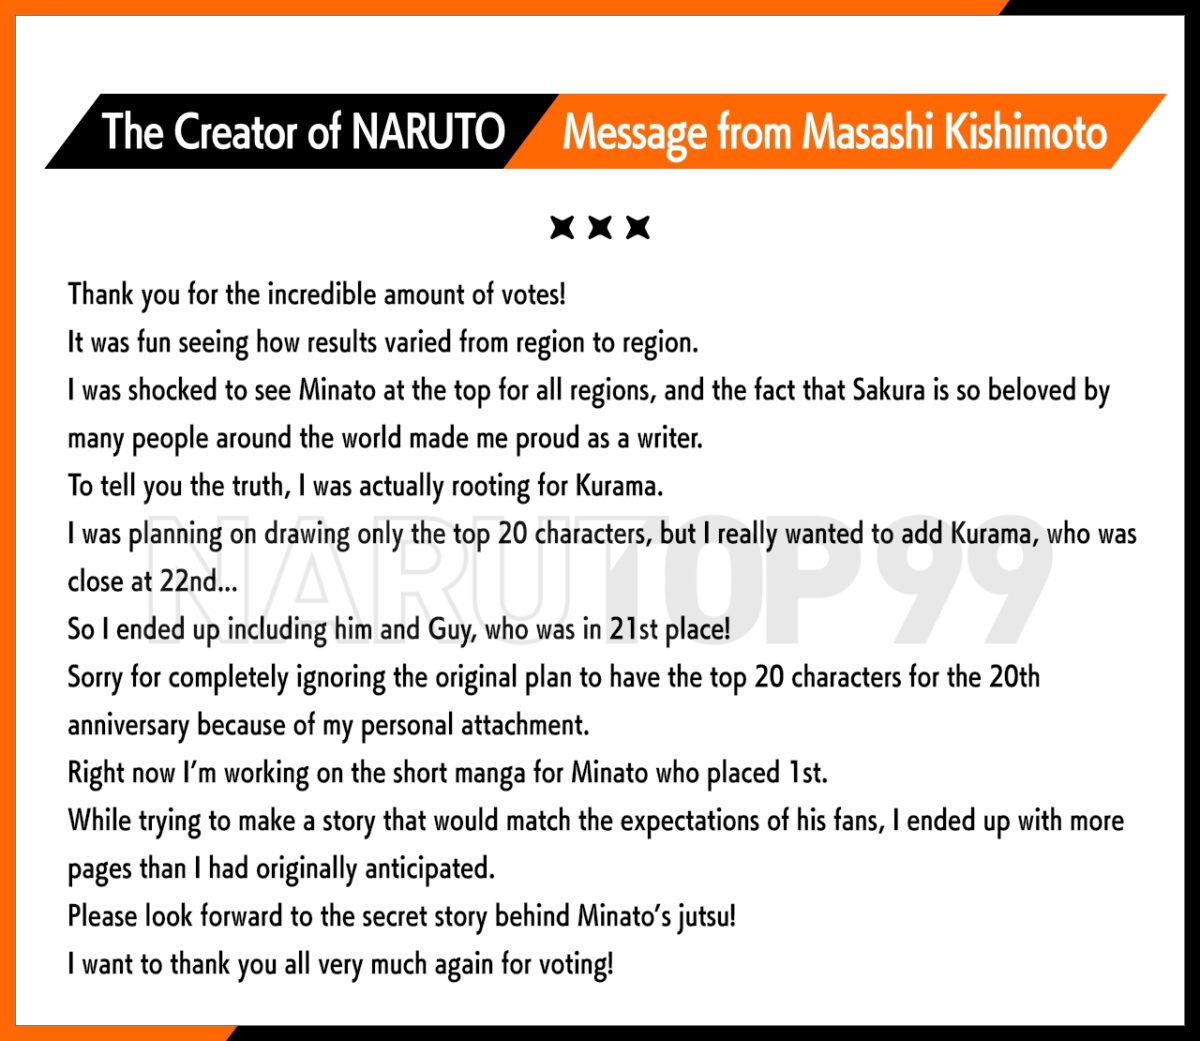 The First Worldwide NARUTO Character Popularity Vote, NARUTOP99